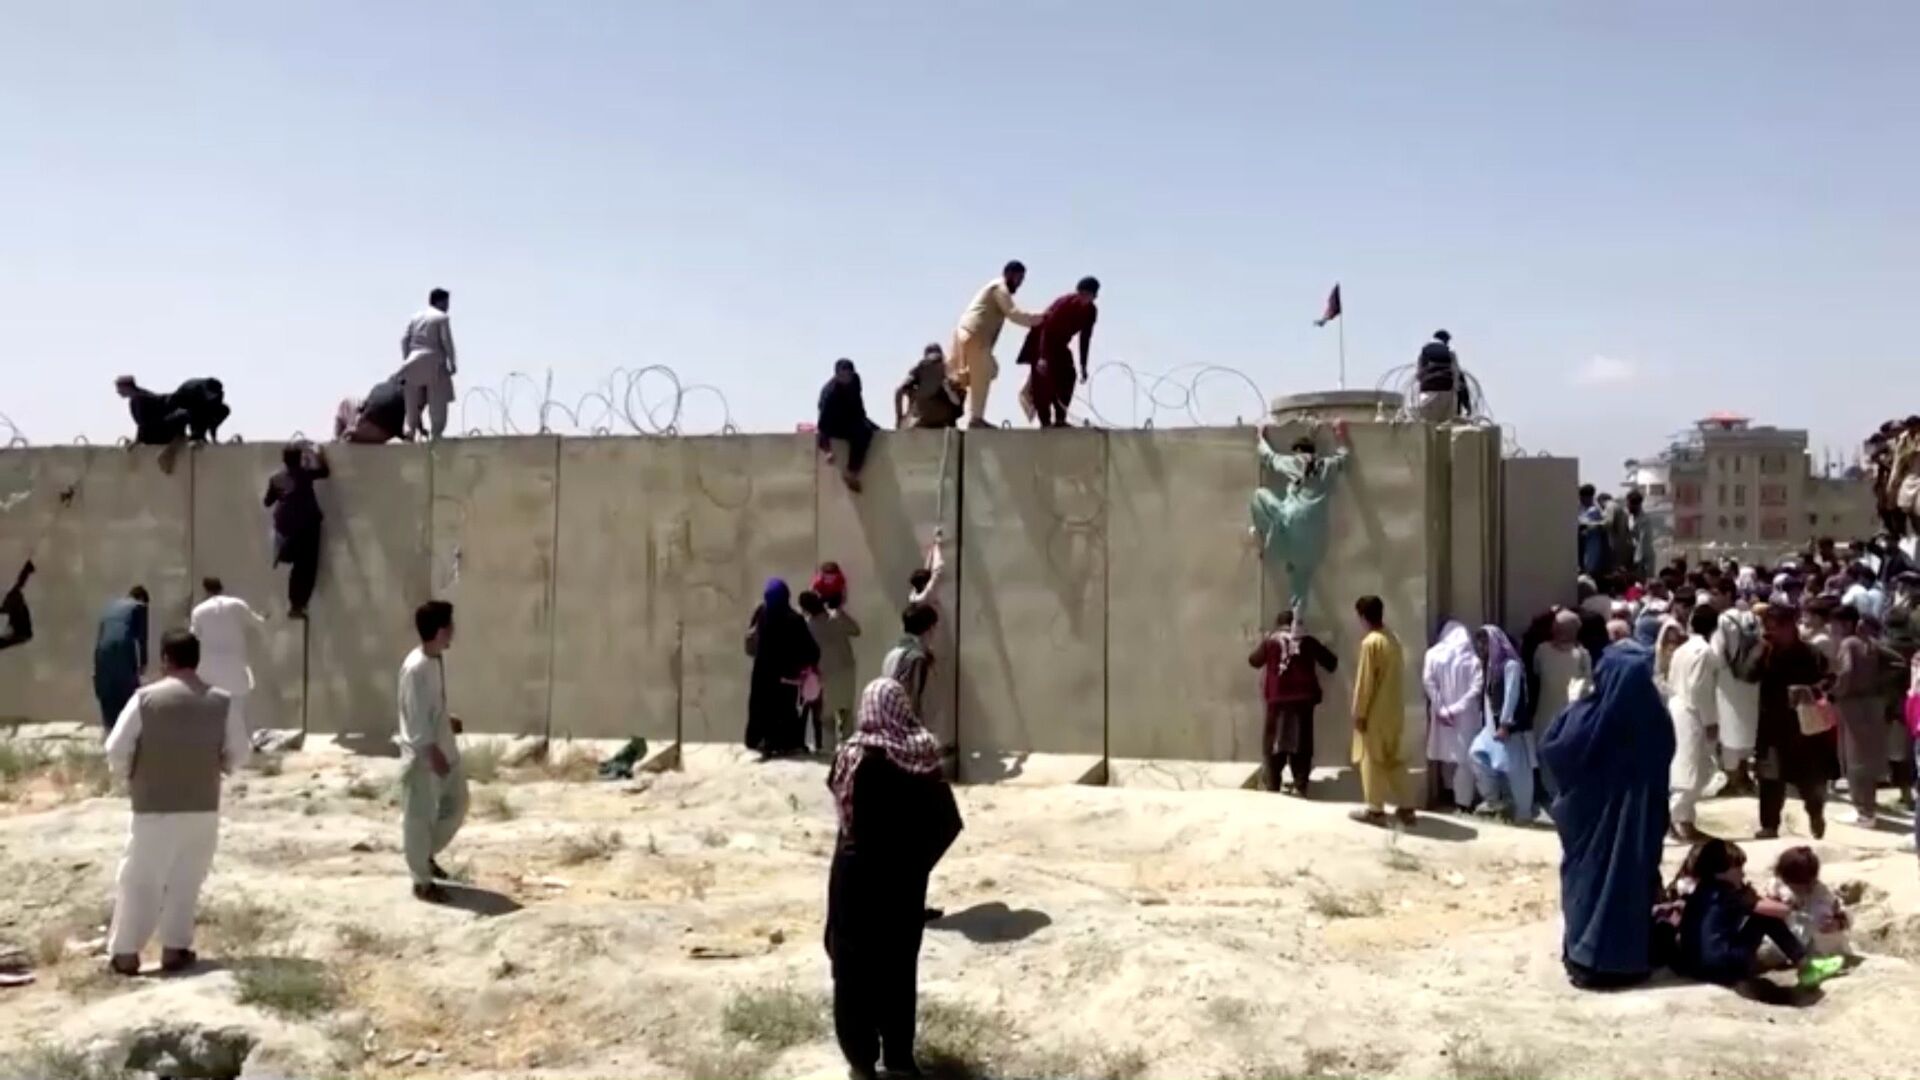 People climb a barbed wire wall to enter the airport in Kabul, Afghanistan August 16, 2021, in this still image taken from a video - Sputnik International, 1920, 07.09.2021